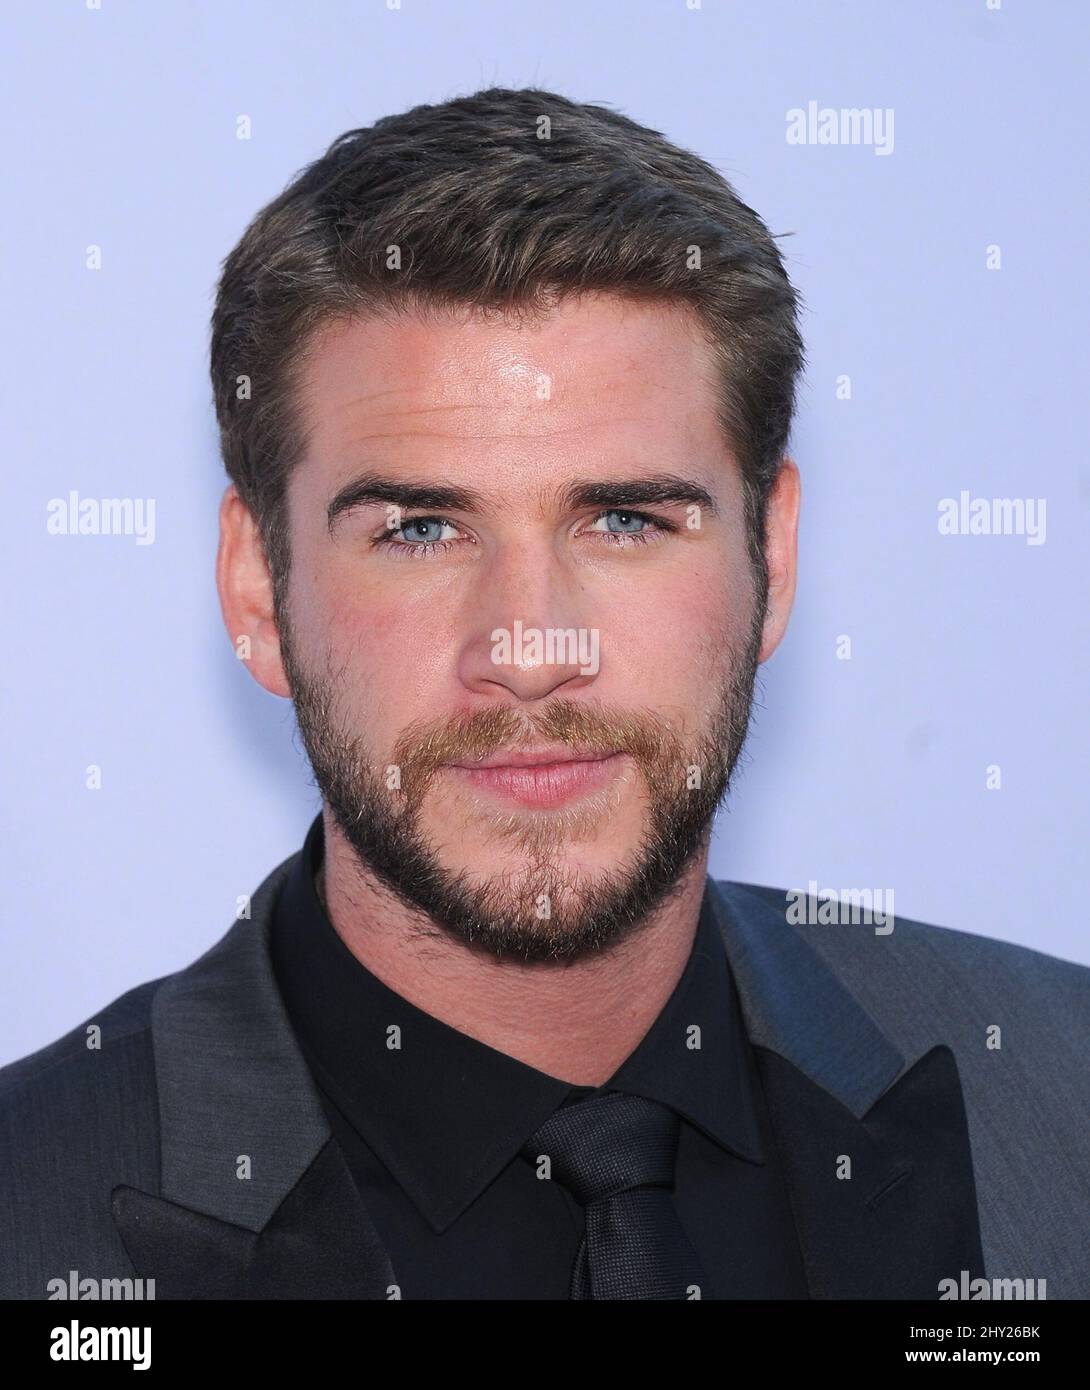 Liam Hemsworth attends the 'Paranoia' US premiere held at the Directors Guild of America, Los Angeles. Stock Photo